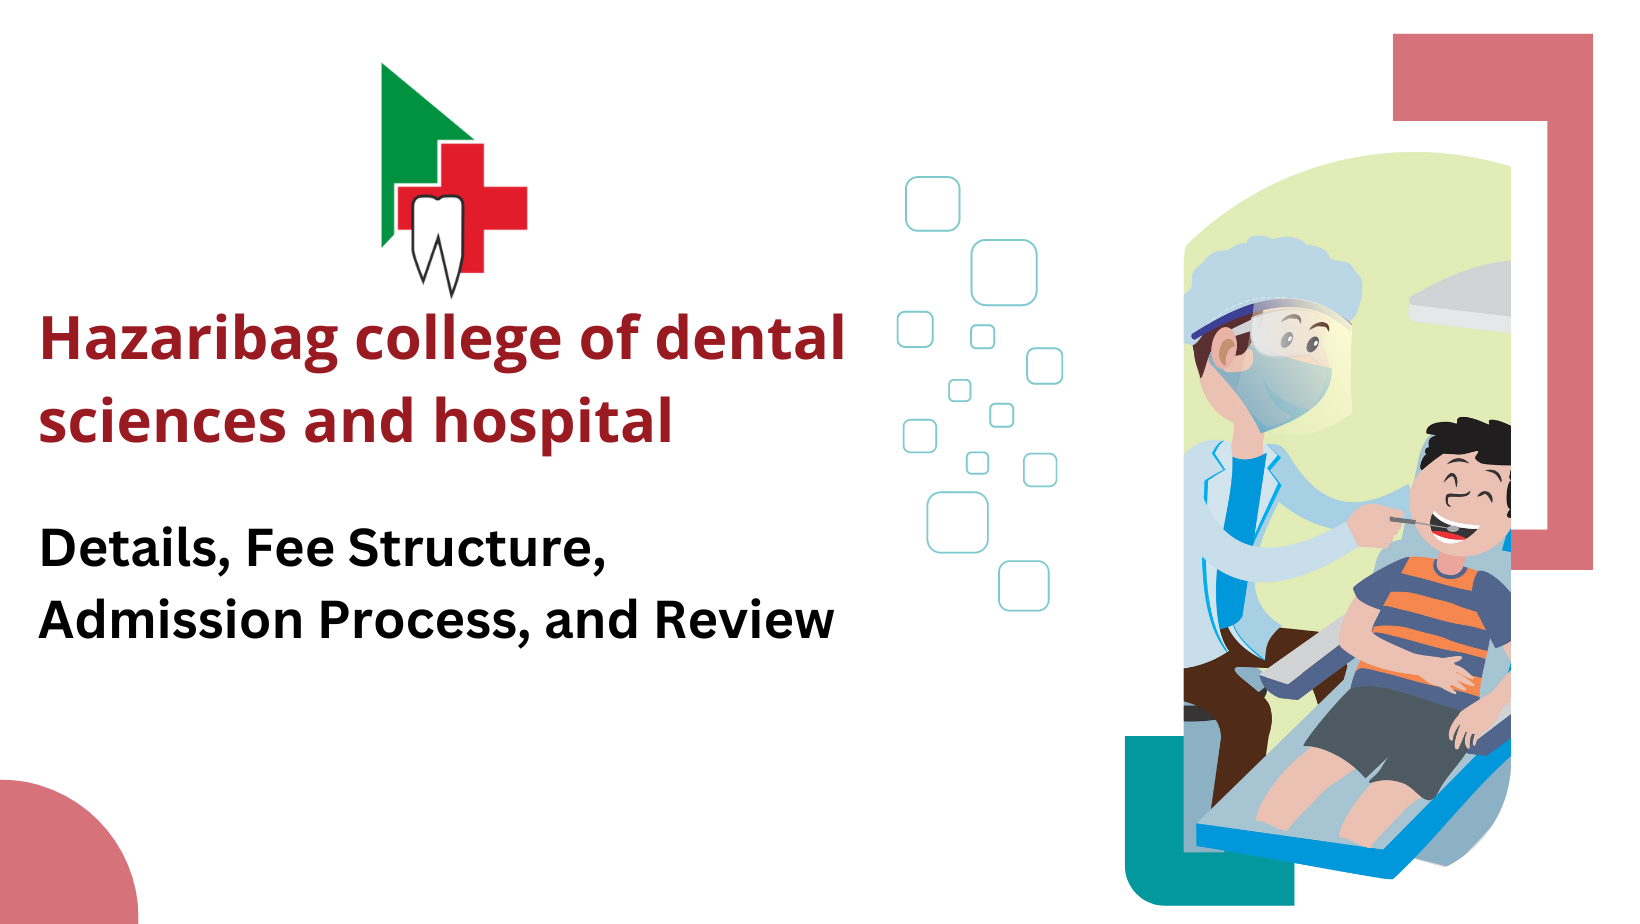 Hazaribag College of Dental Sciences and Hospital: Details, Admission Process, Fee Structure, and Reviews